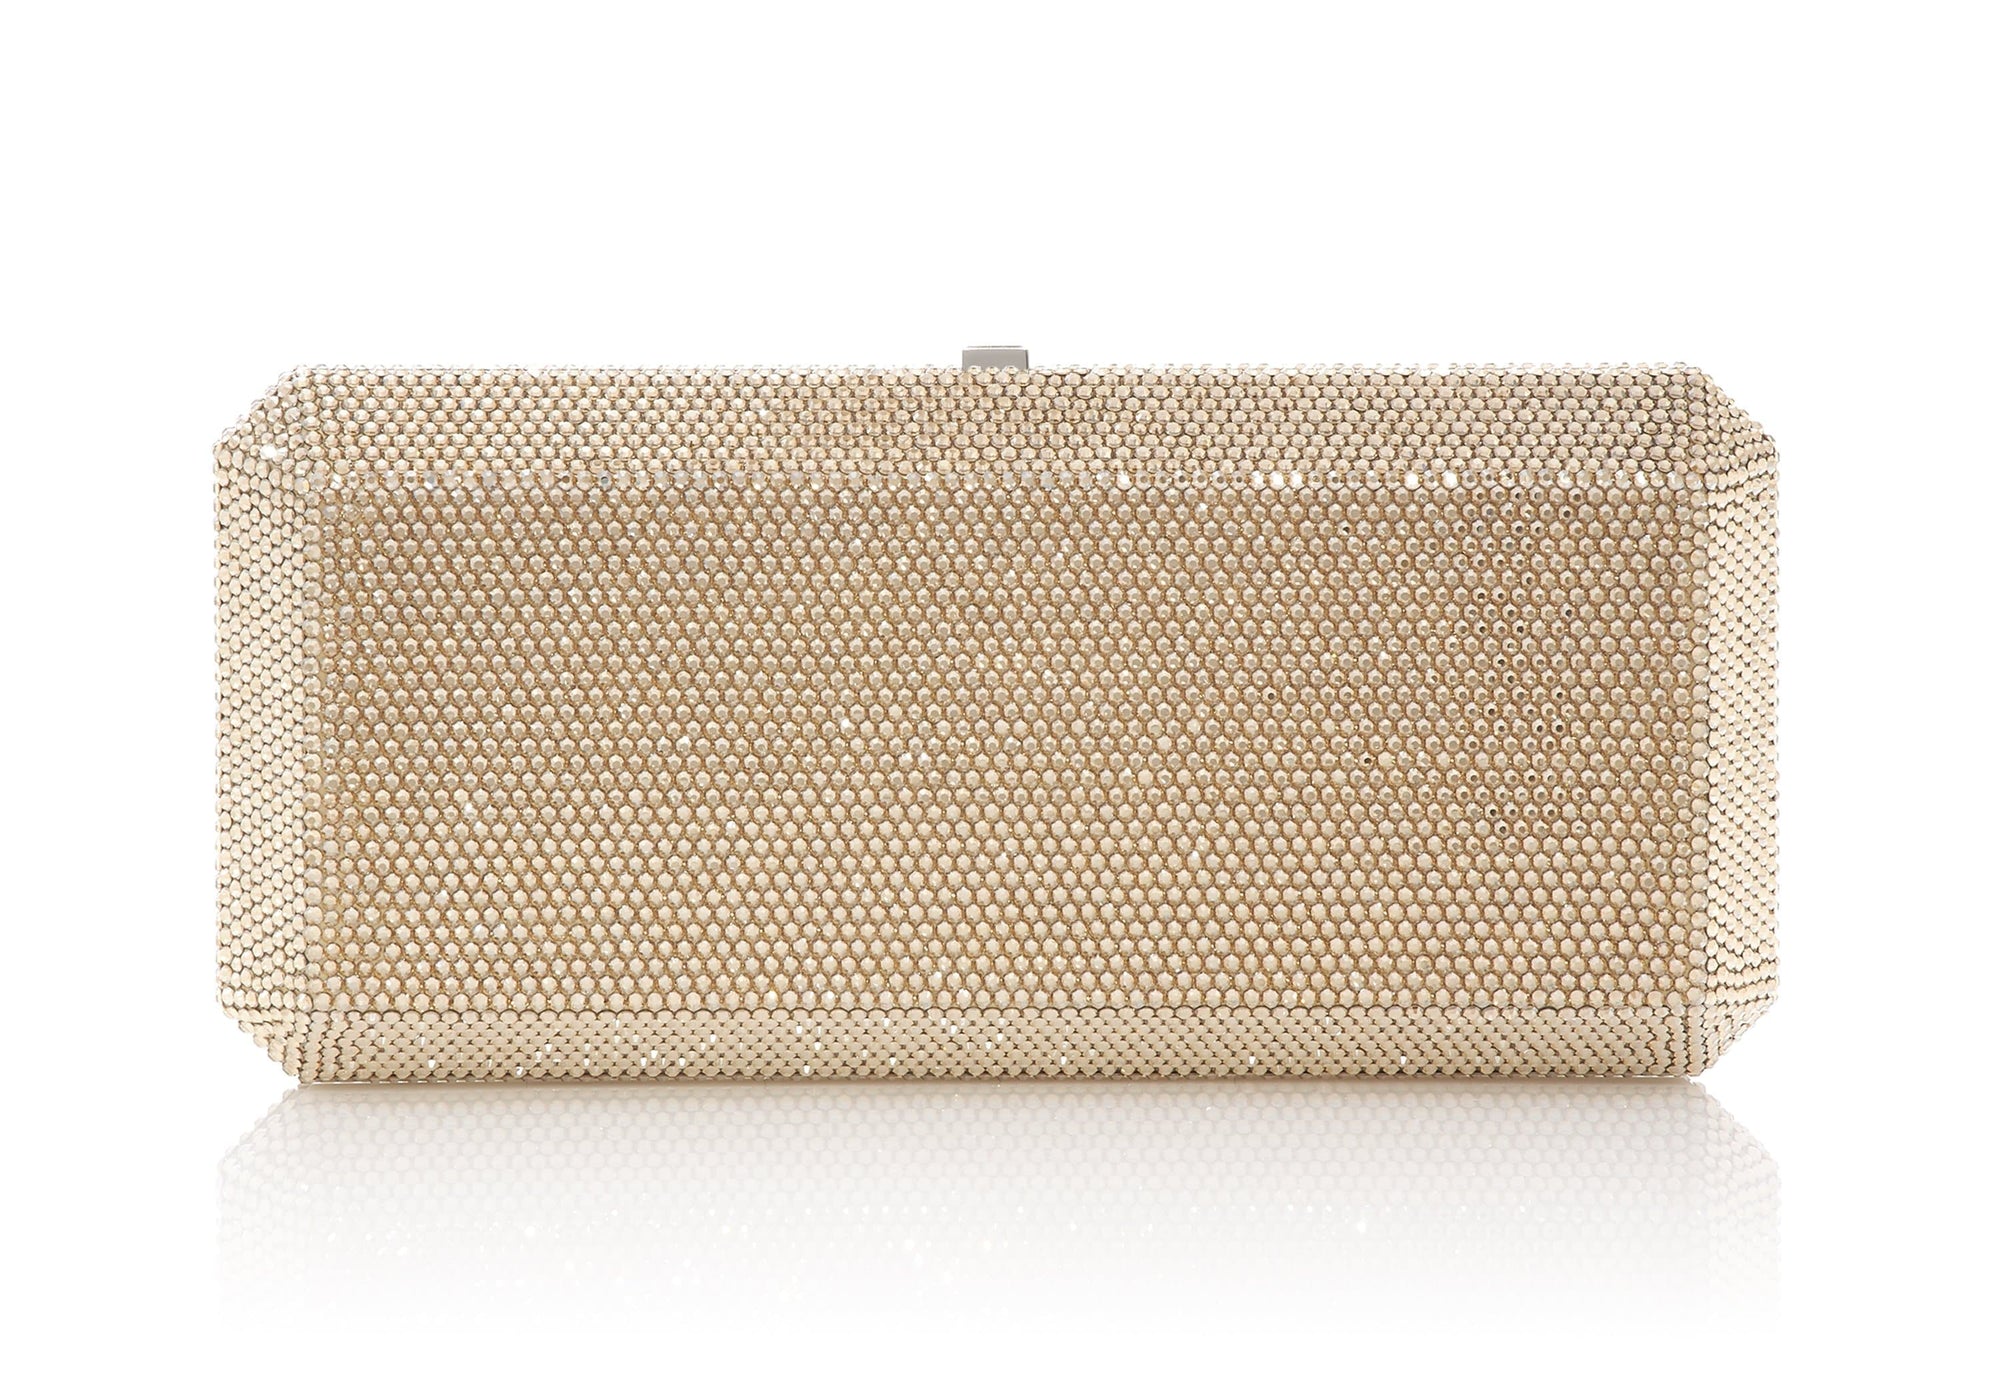 Celebs Love: Judith Leiber Couture Clutch Bags – Fashion Bomb Daily